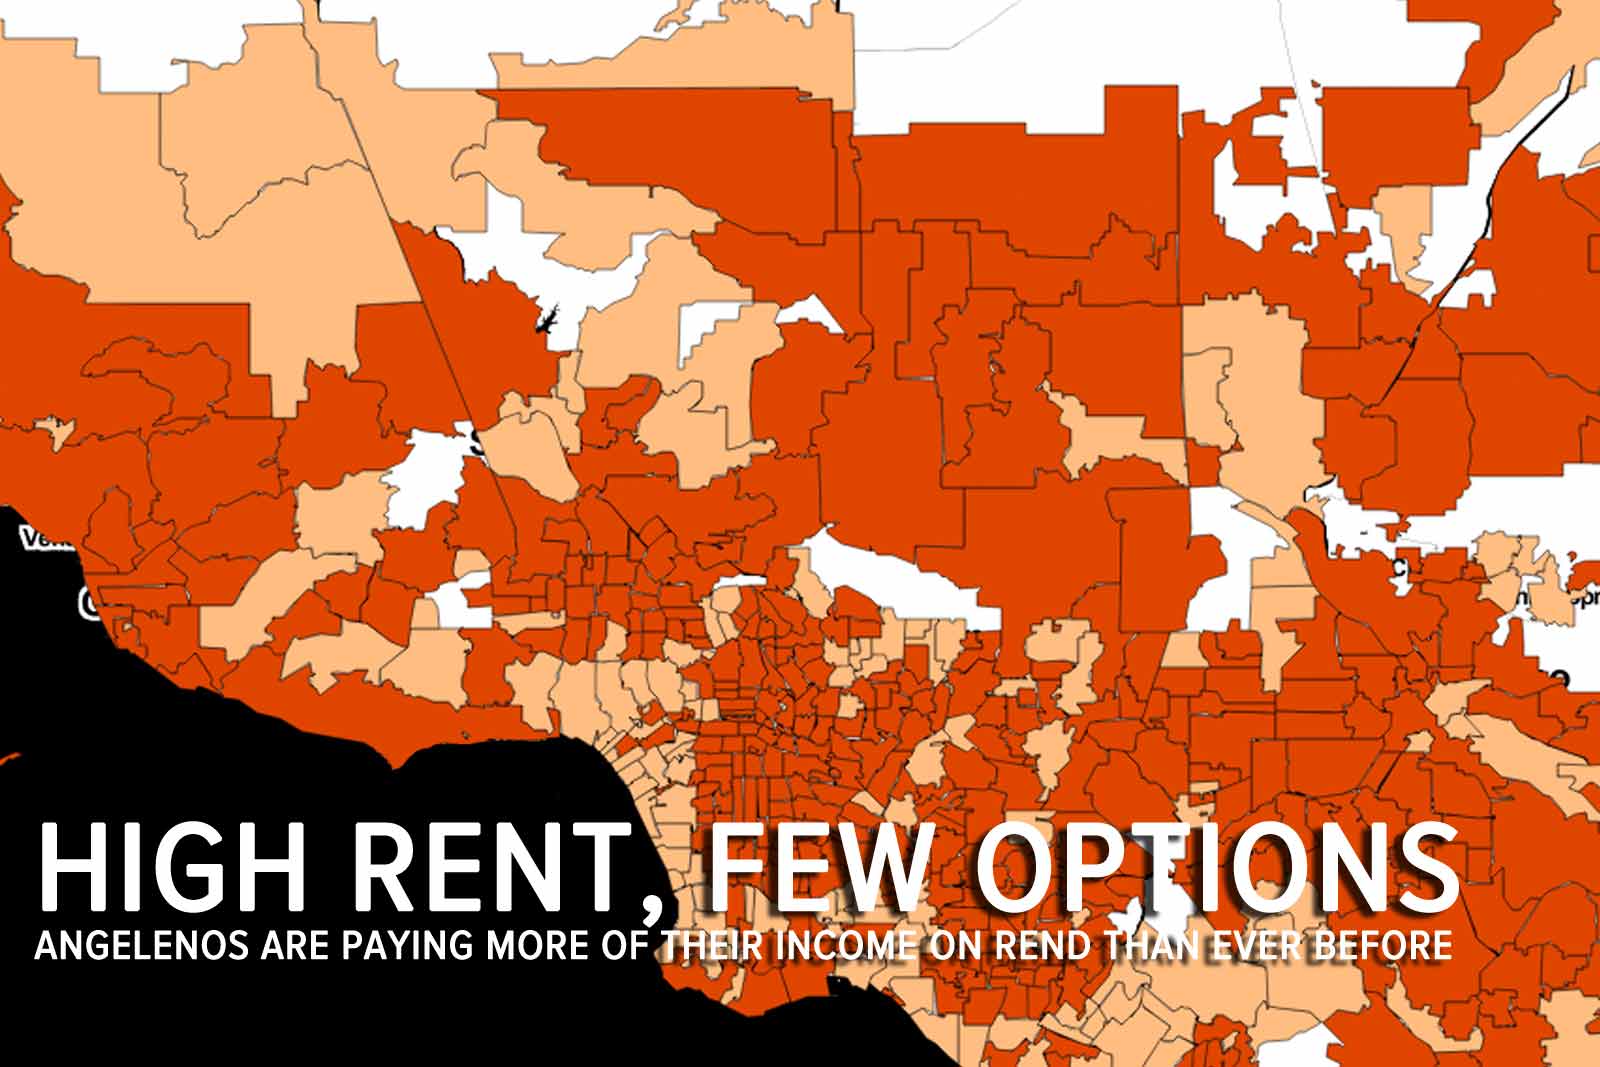 high rent, few options: rising rents and short supply have